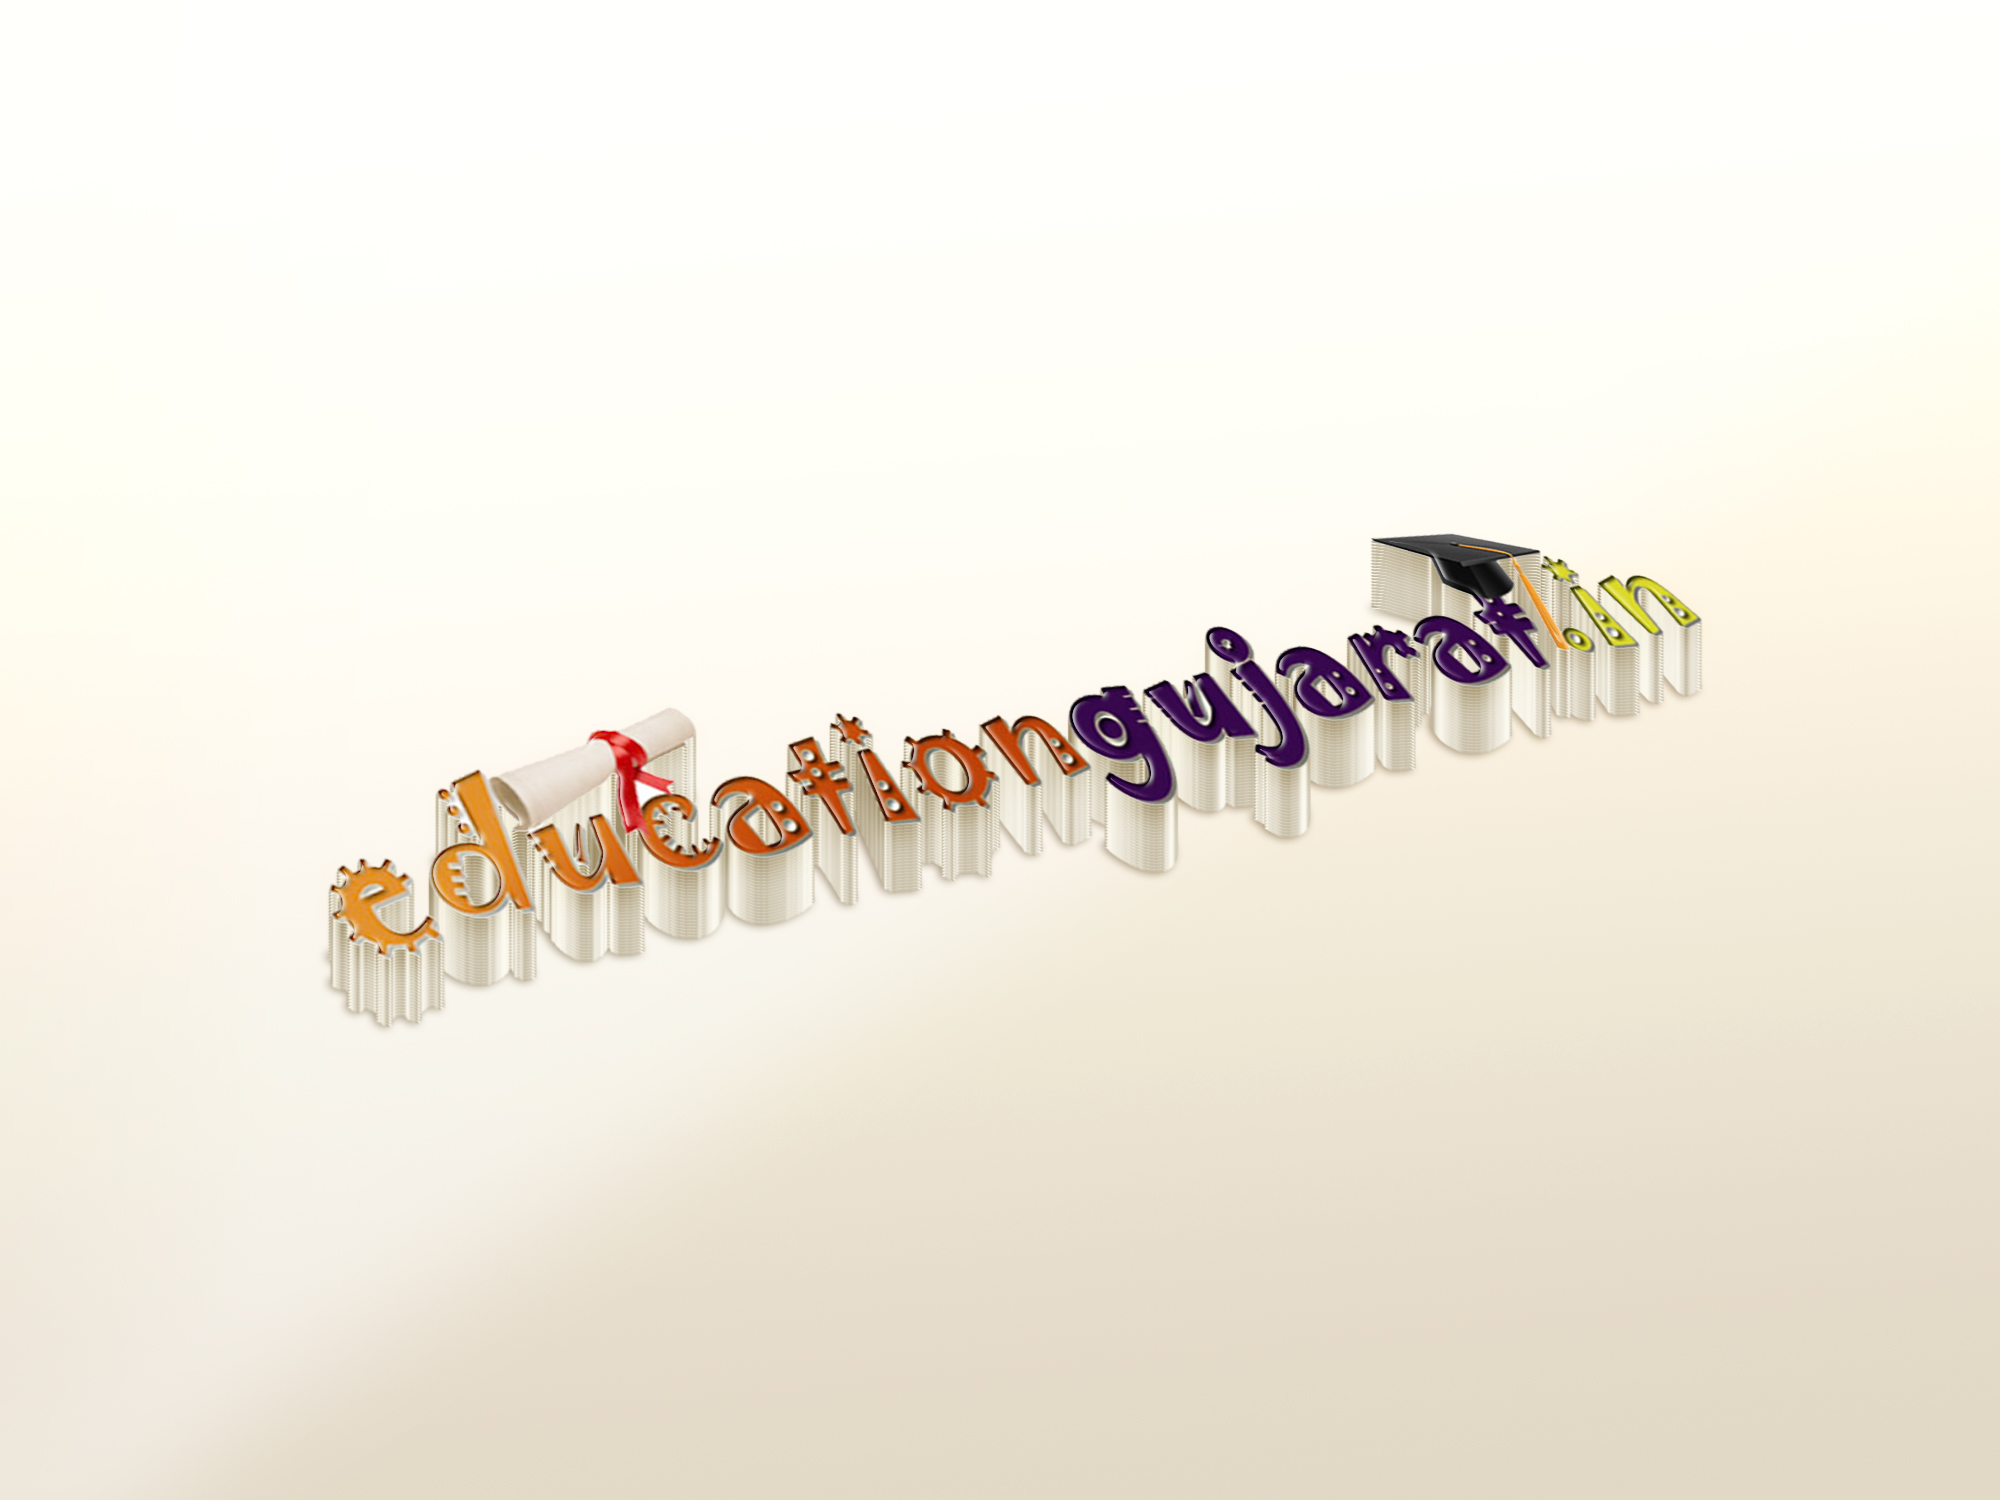 education - XpertLab Technologies Private Limited